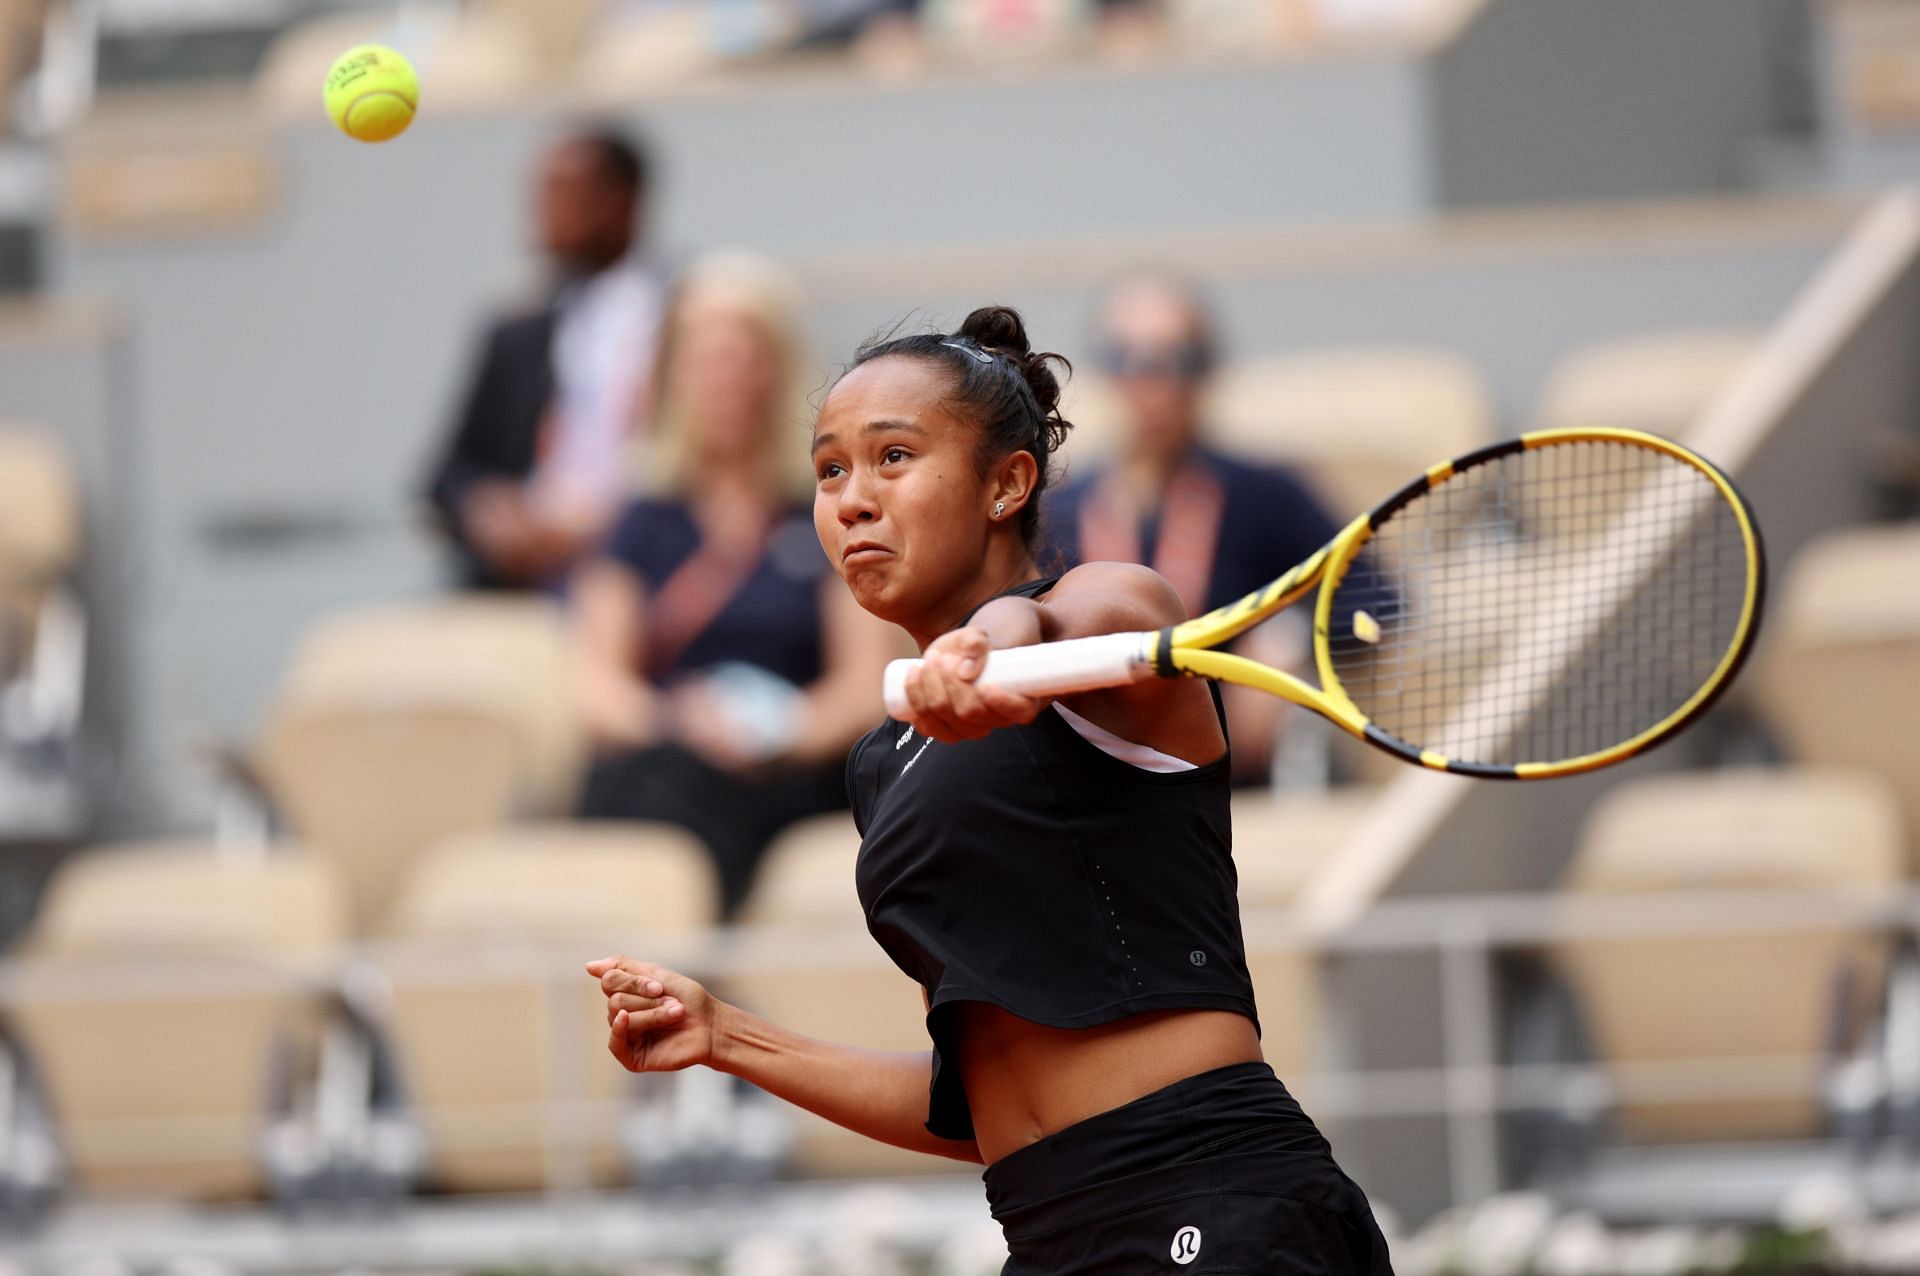 Leylah Fernandez in action at the French Open